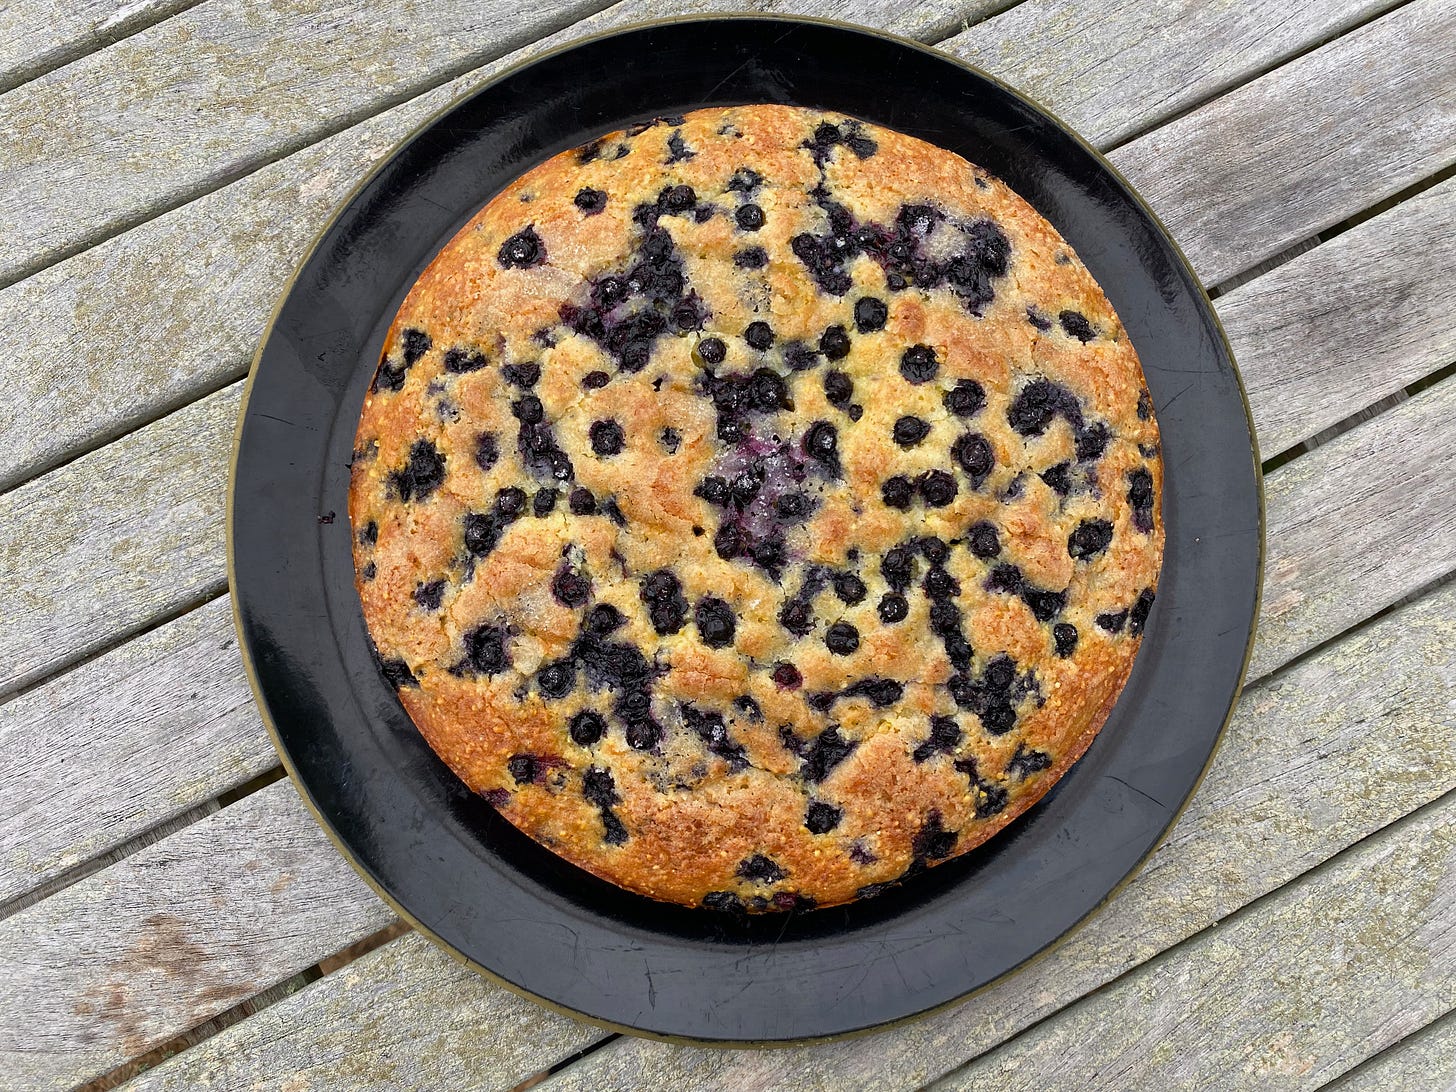 A round golden brown cake full of blueberries on a black platter.